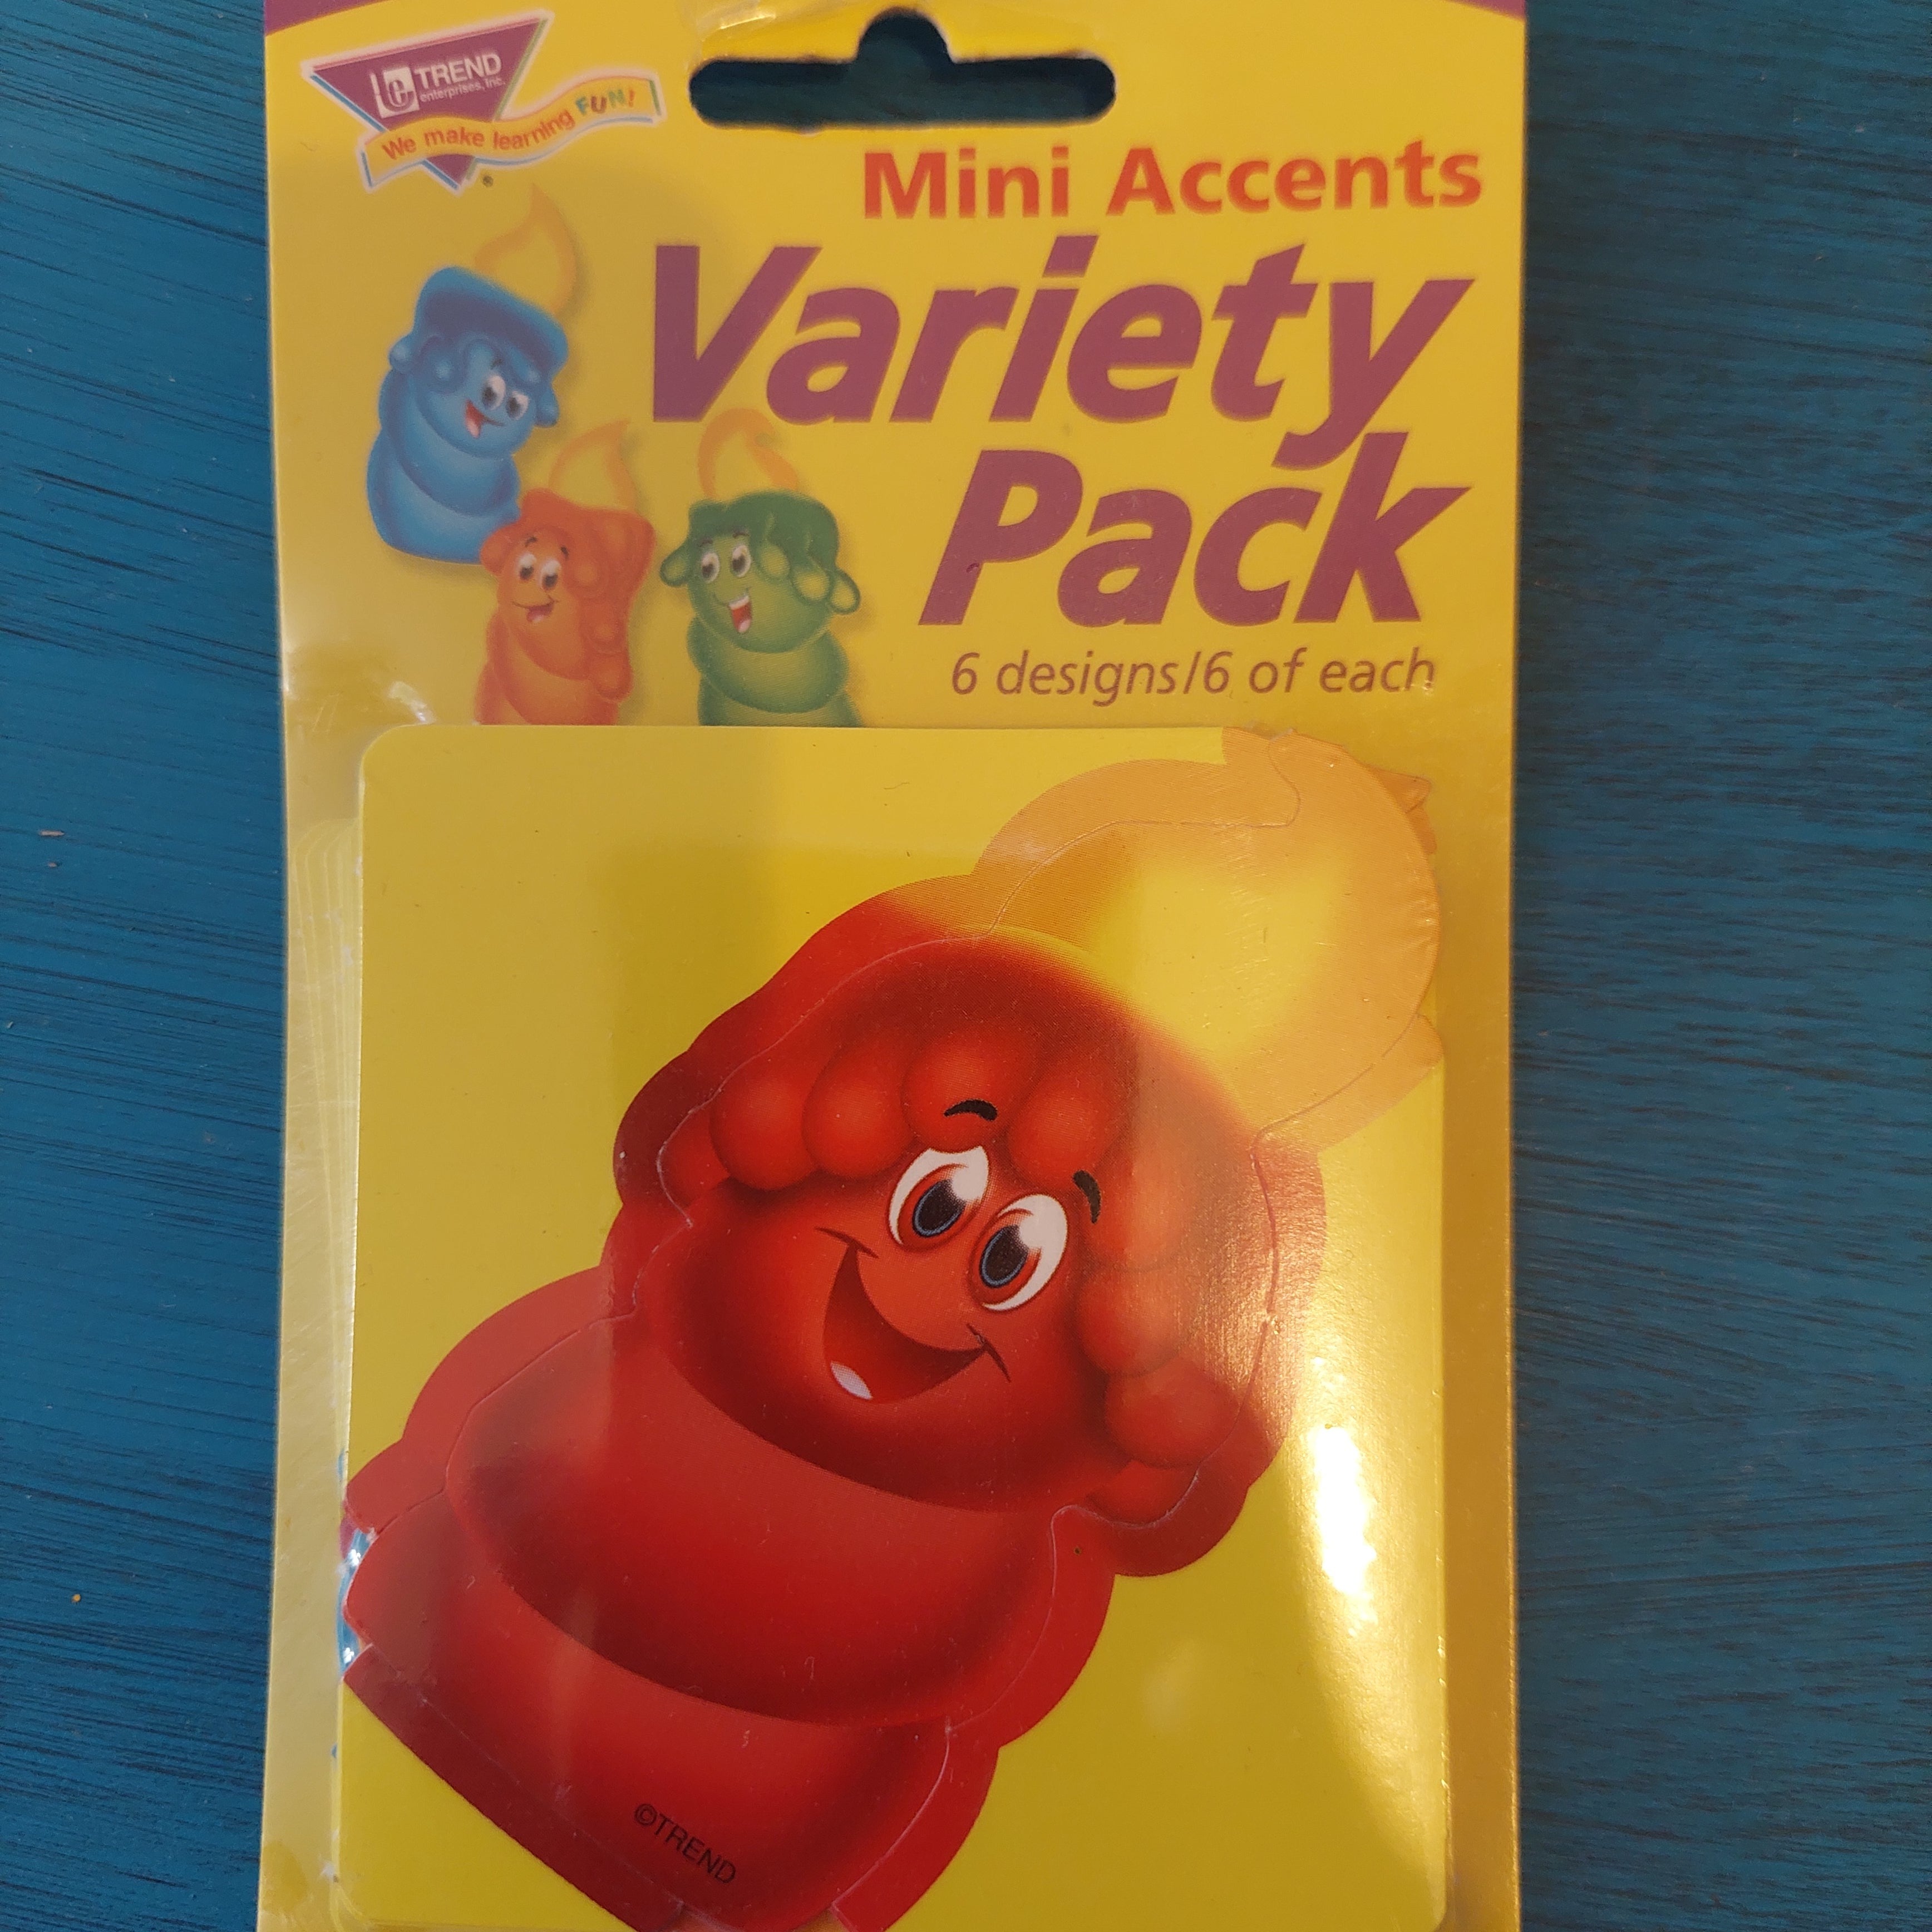 Mini Accents Variety Packs